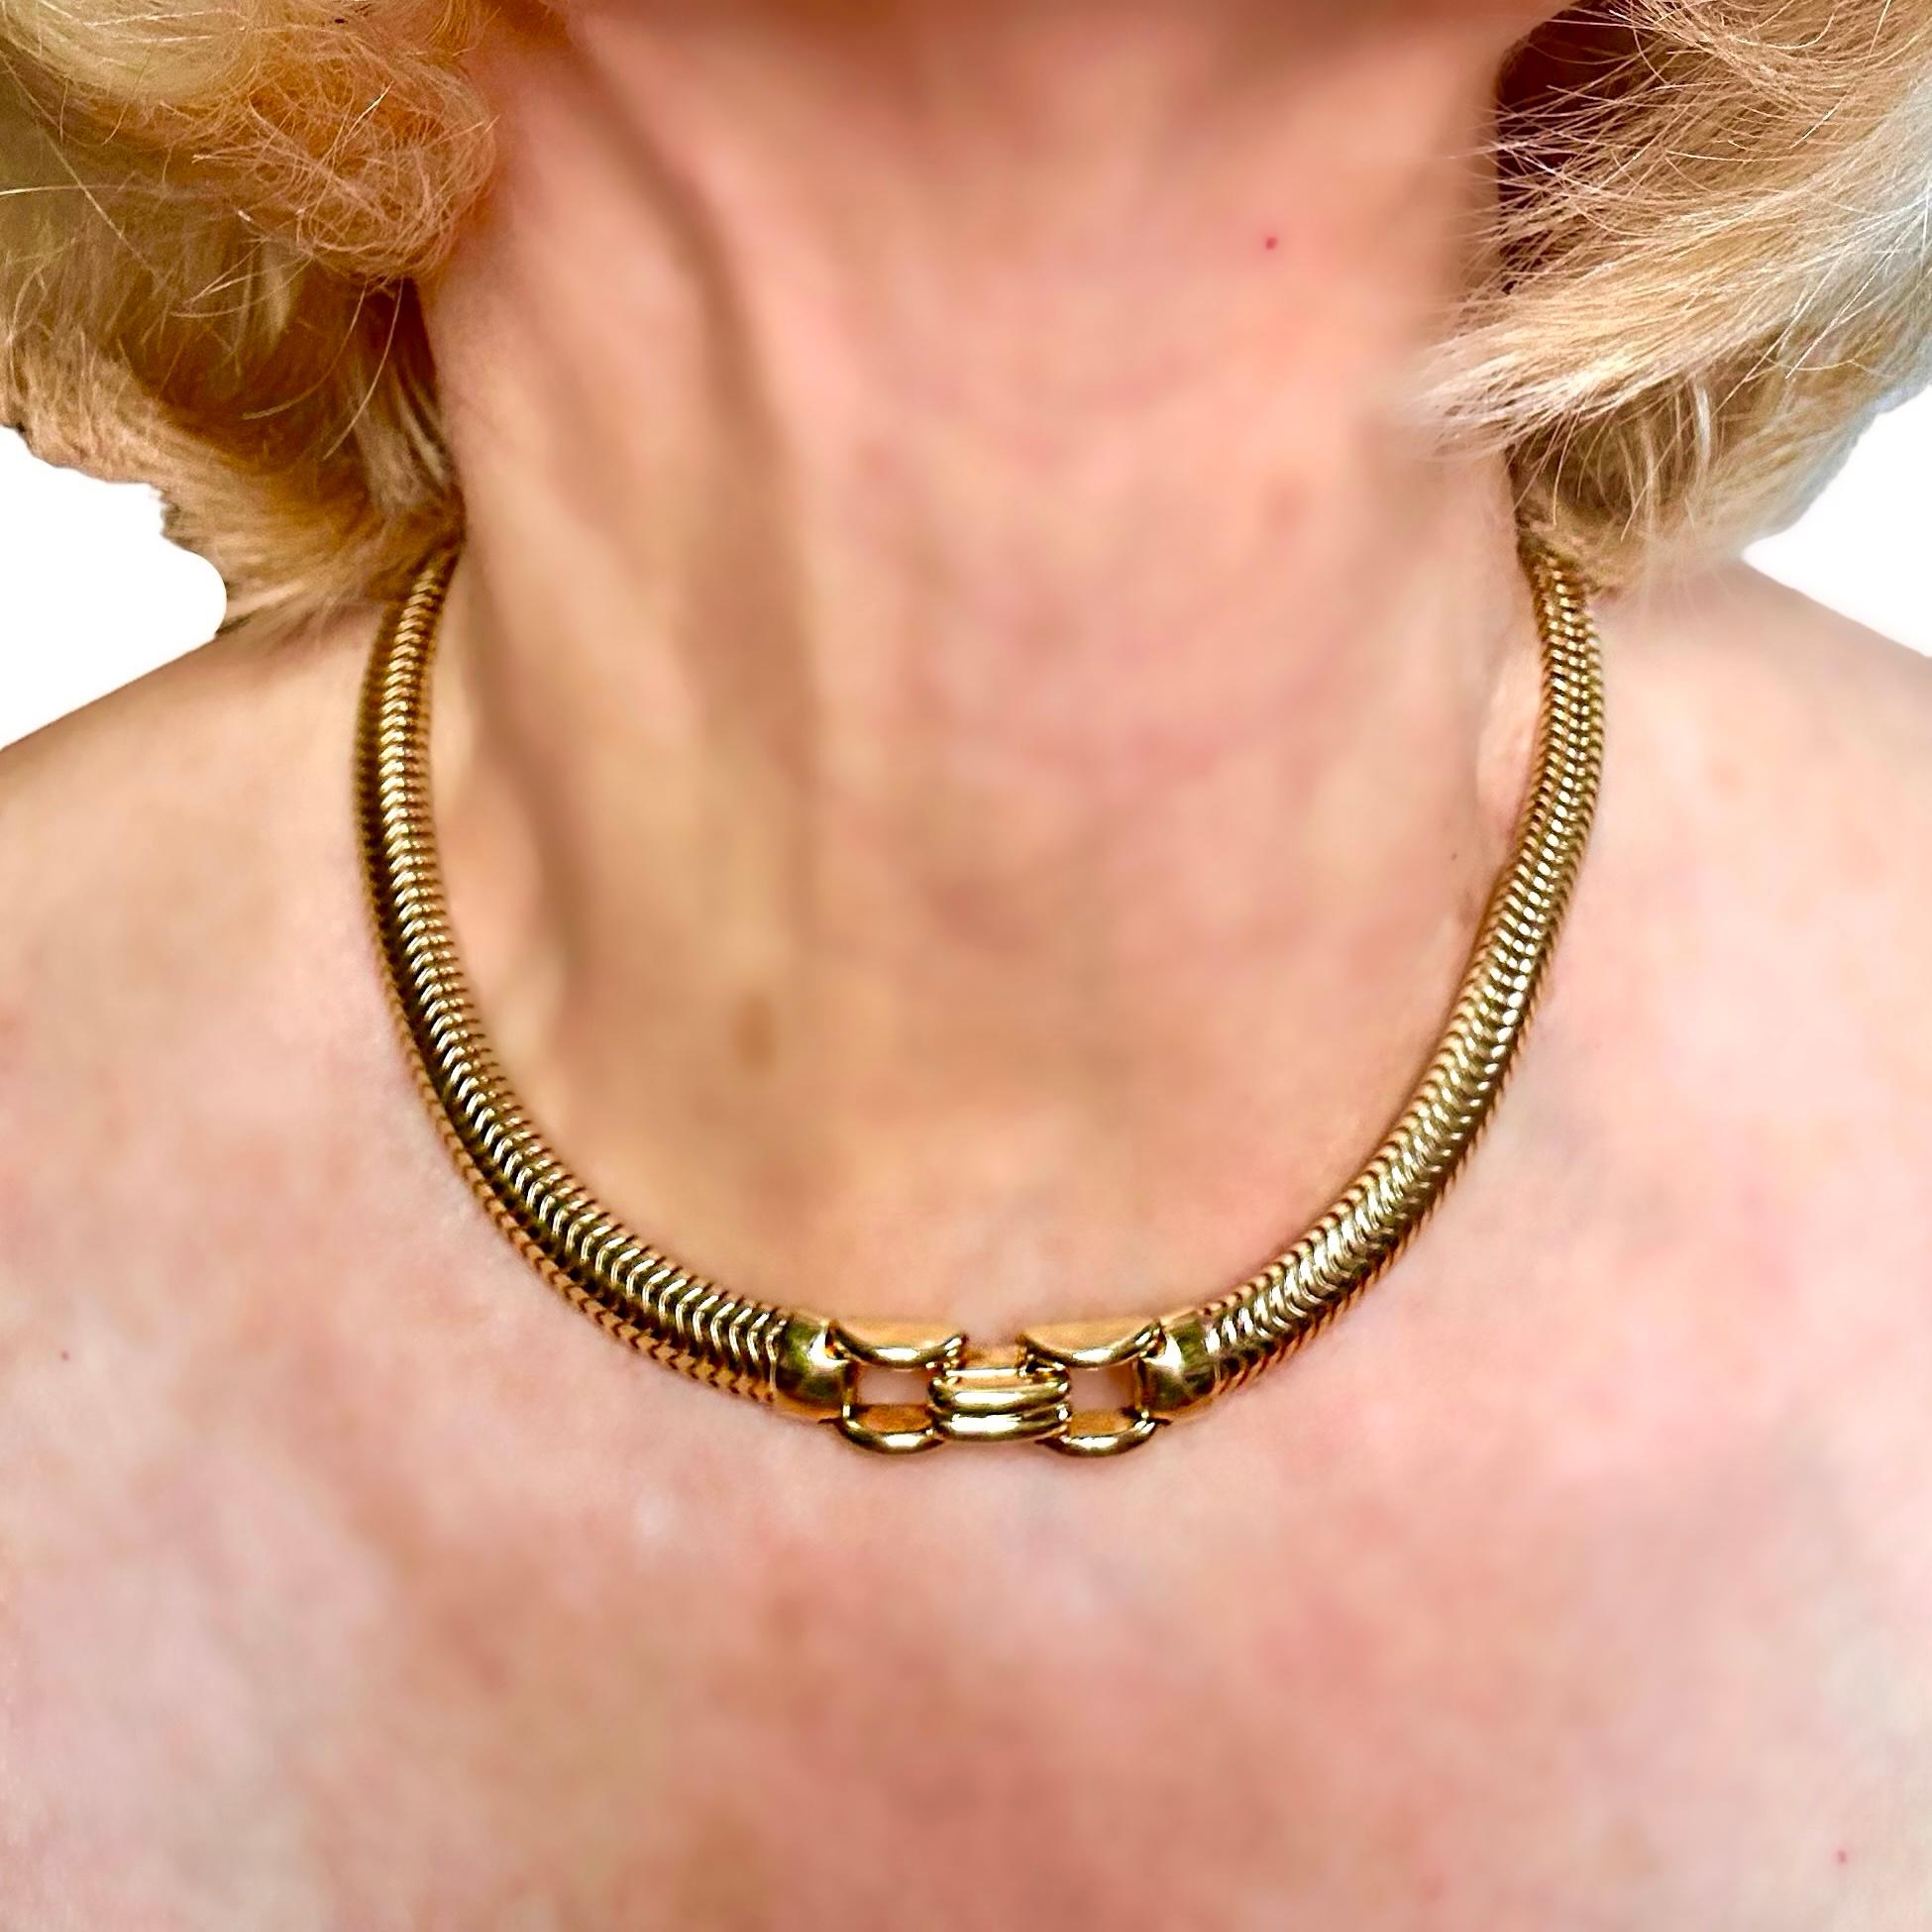 Retro Period Cartier Snake Link Choker Necklace in 14k Yellow Gold For Sale 1